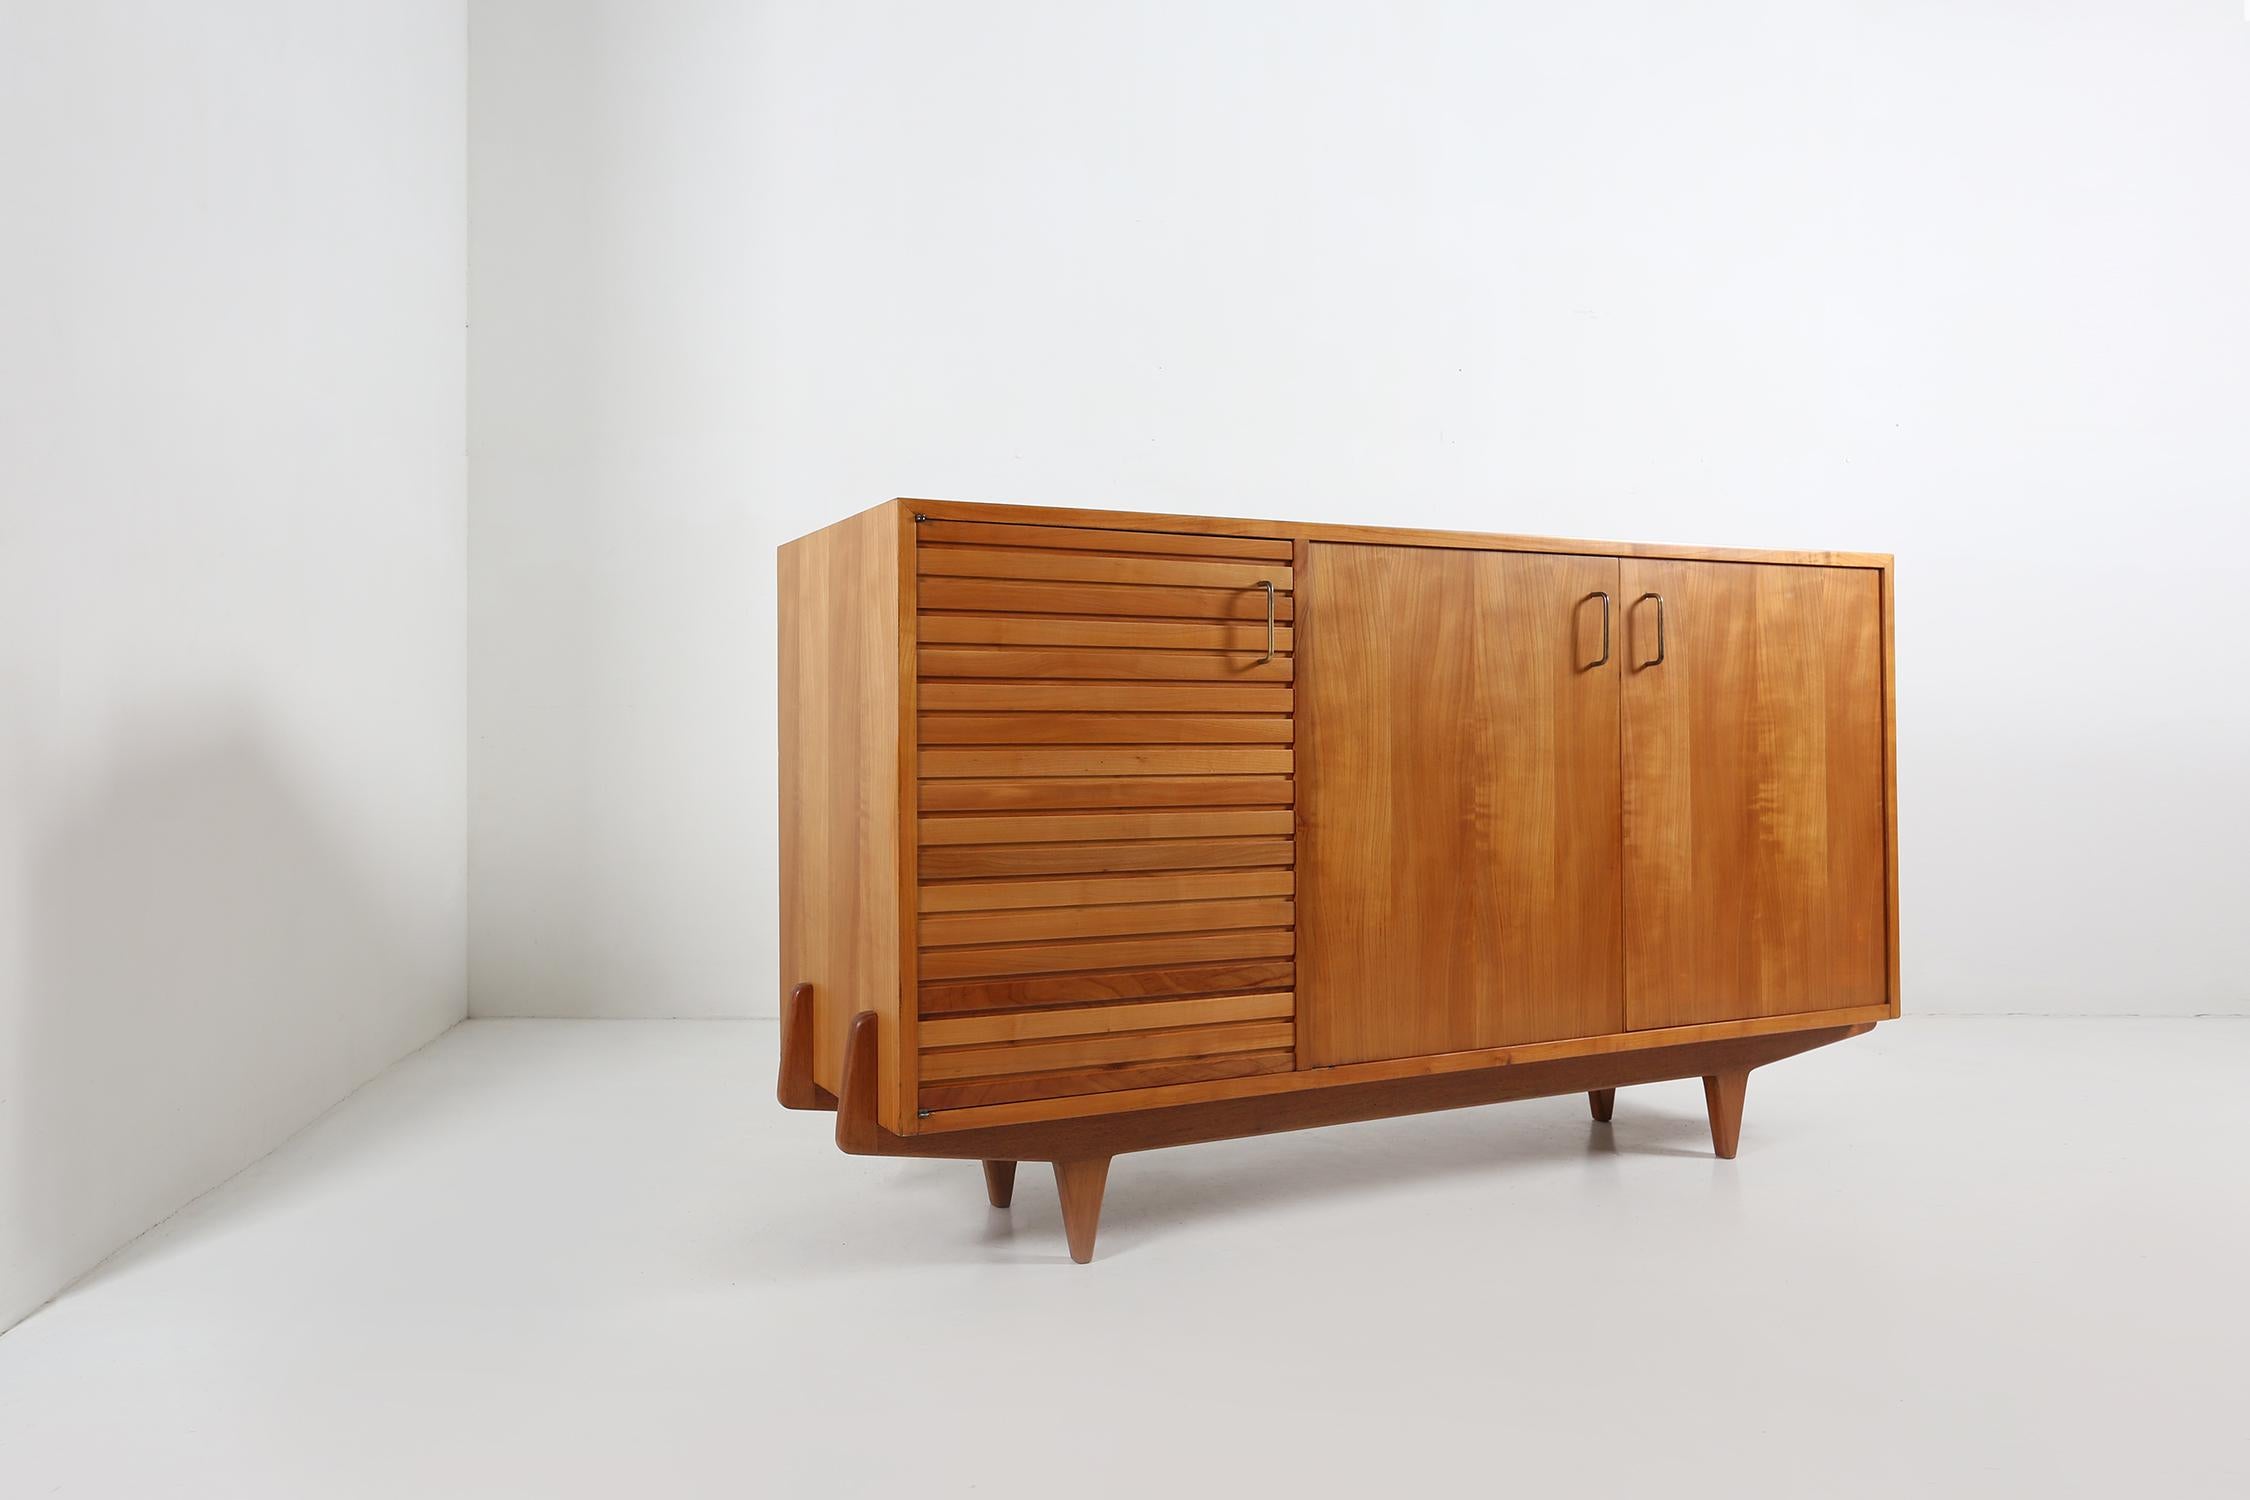 French mid-century sideboard made of American cherry wood.
This sideboard is fully professional restored.

Measure: Width: 180-190 cm.